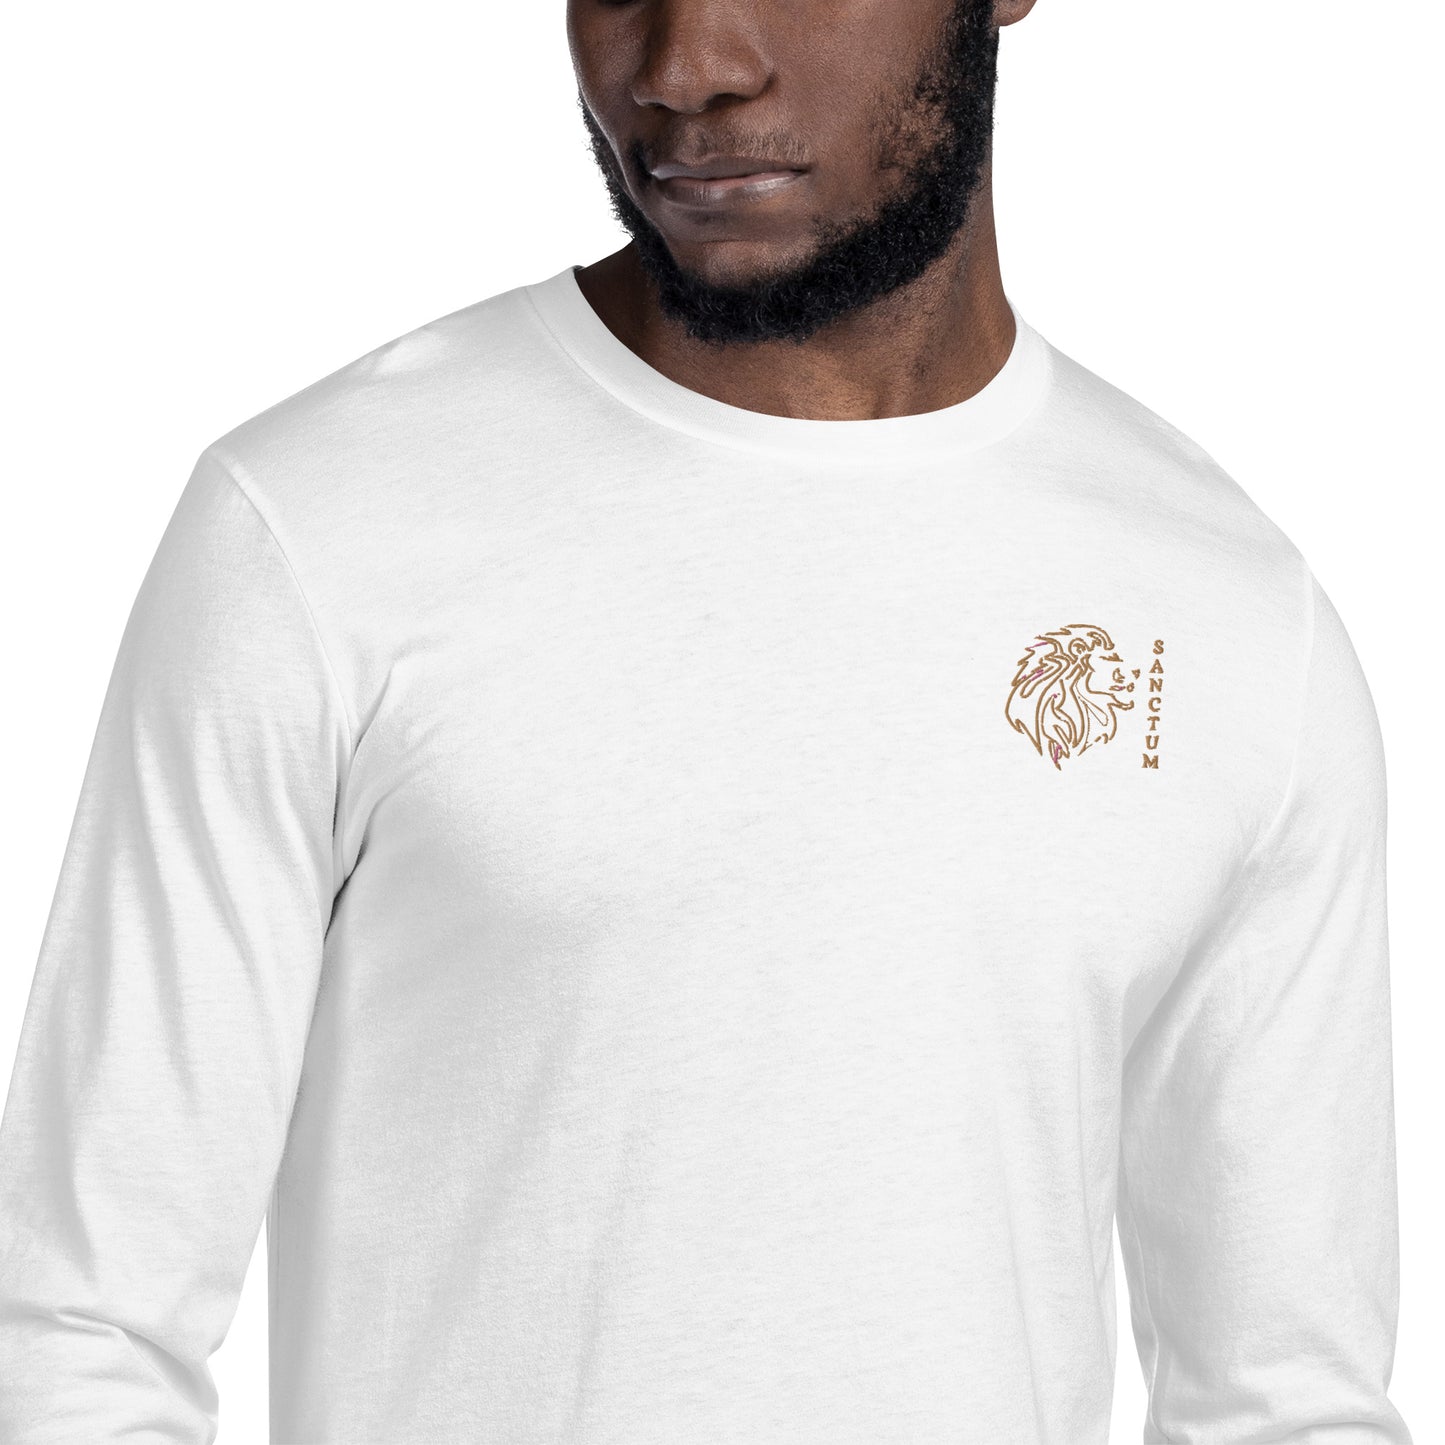 Sanctum Long Sleeve Fitted Crew (embroidered)